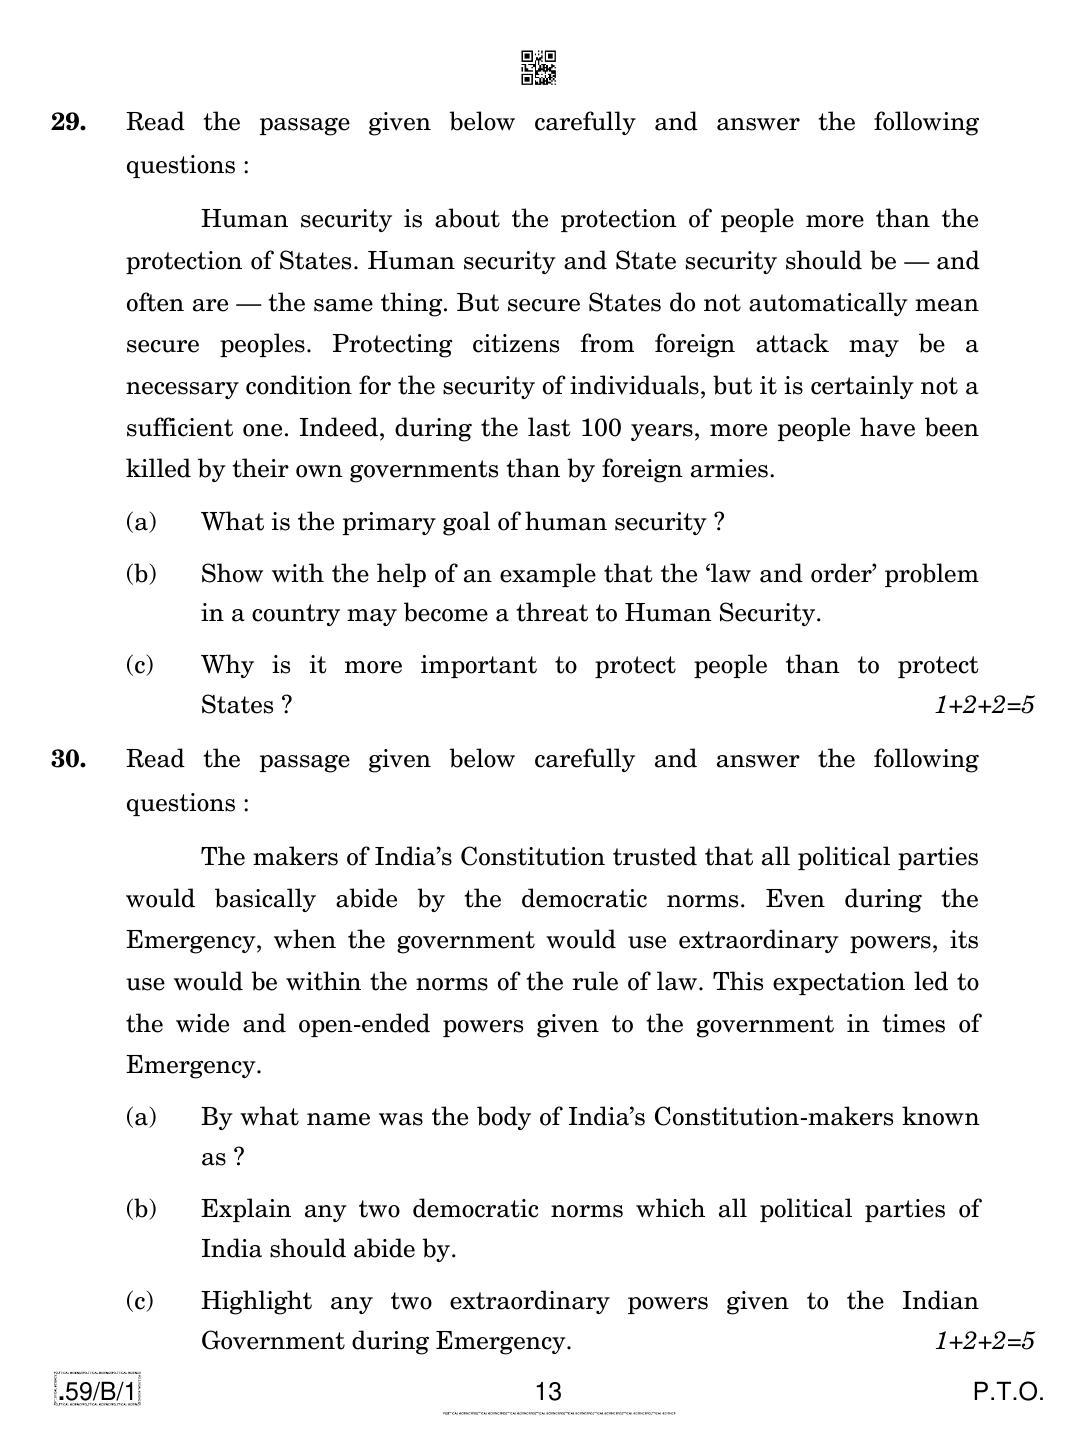 CBSE Class 12 59-C-1 - Political Science 2020 Compartment Question Paper - Page 13